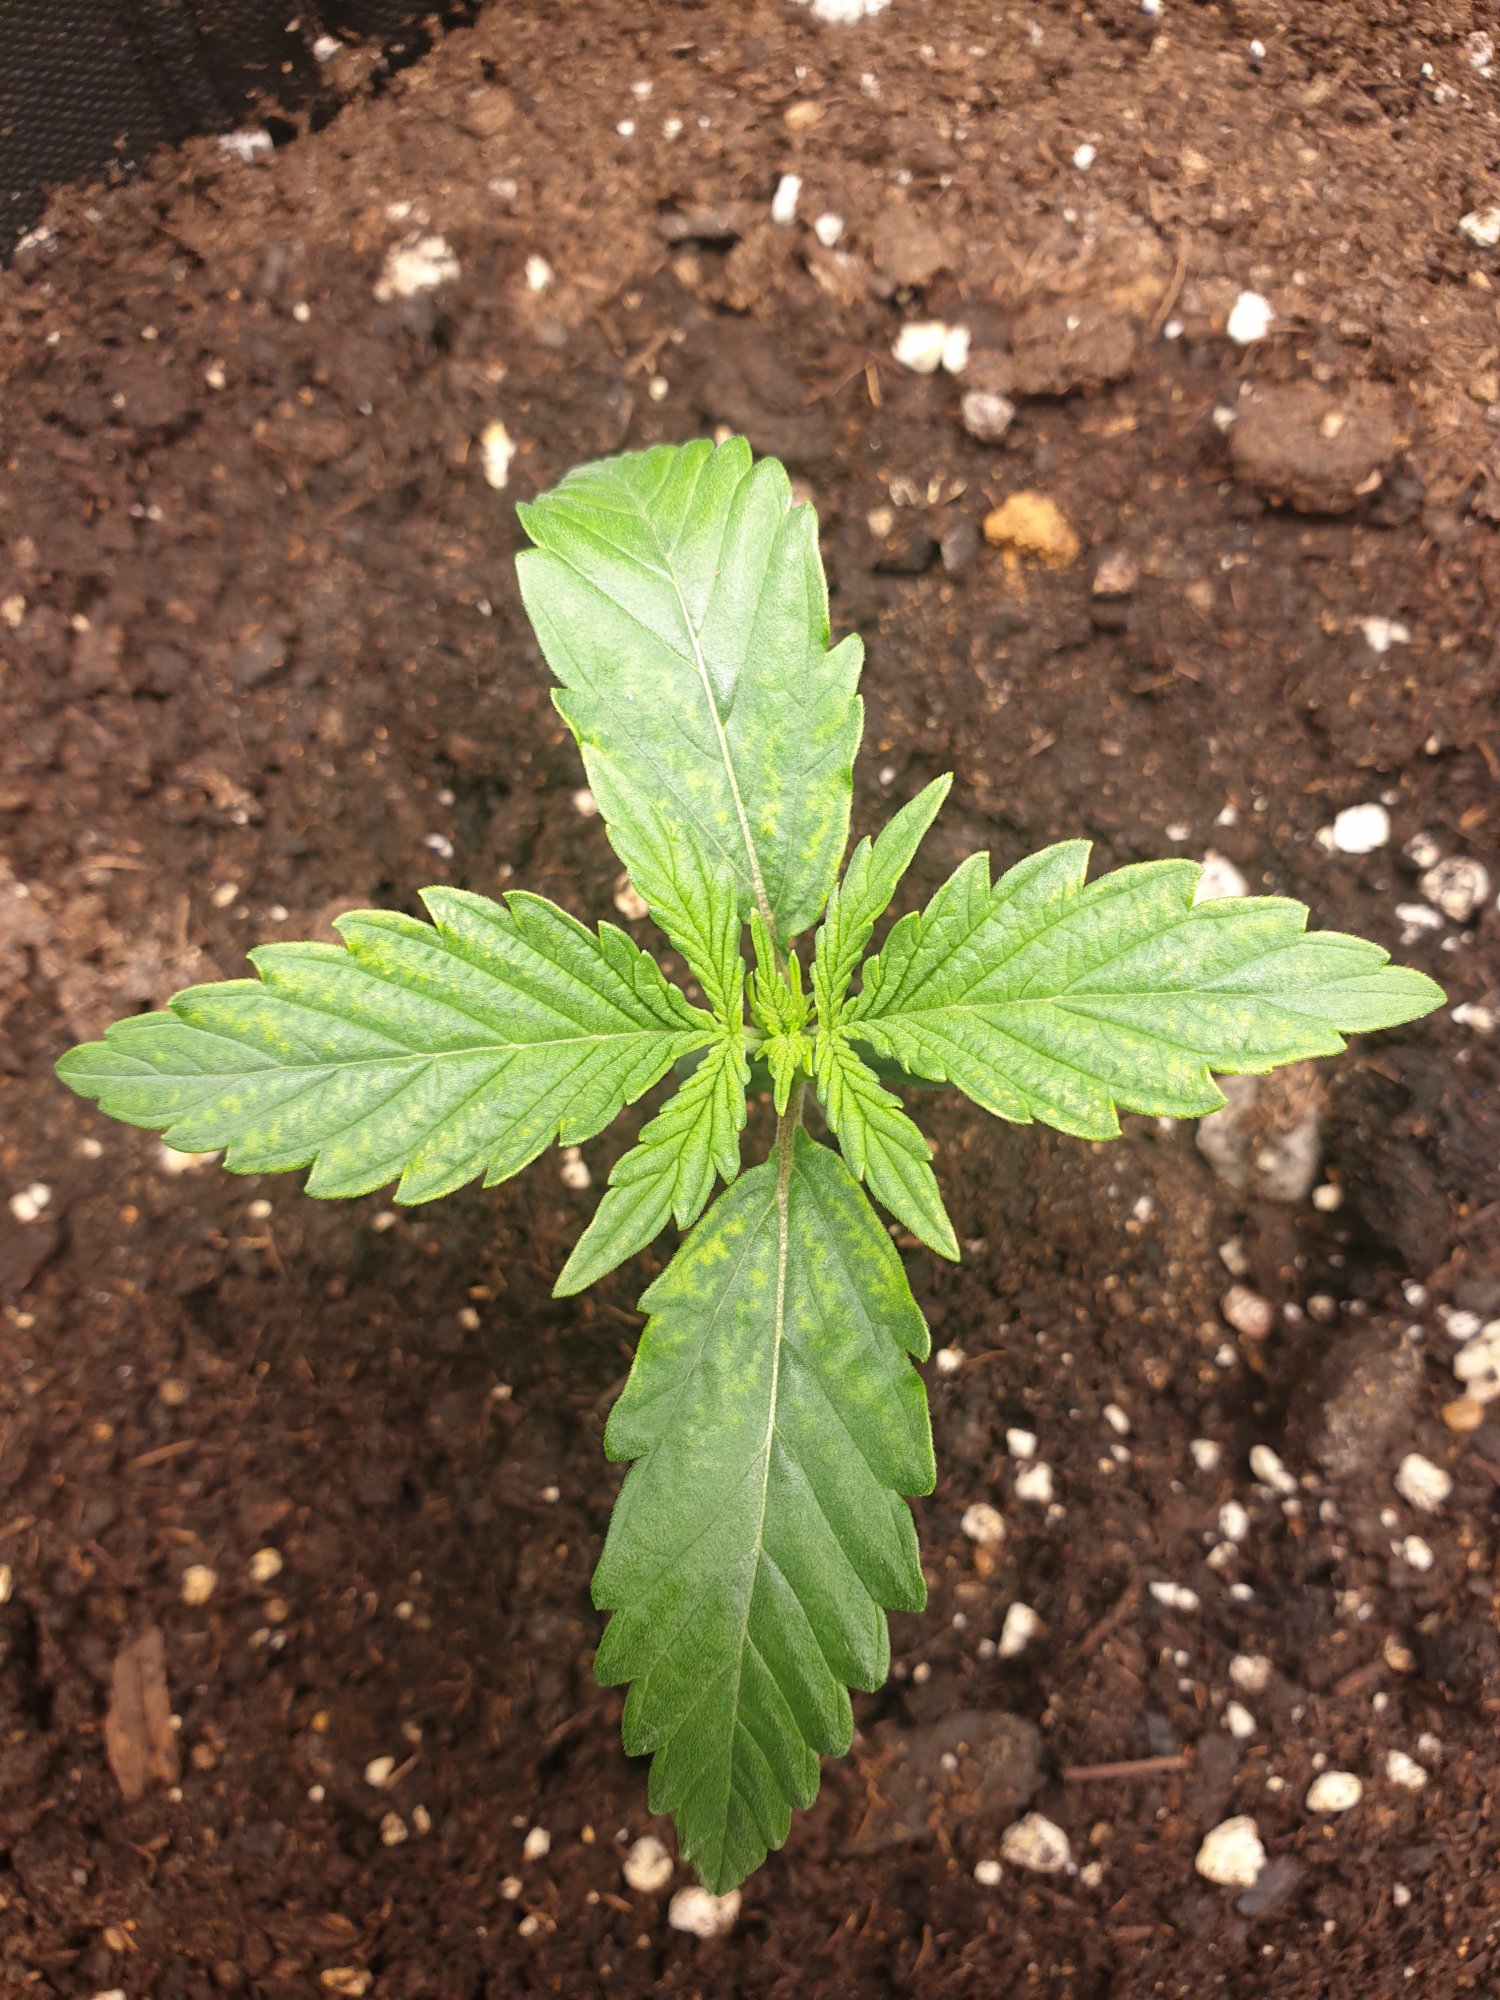 11 day old seedling showing white spots why